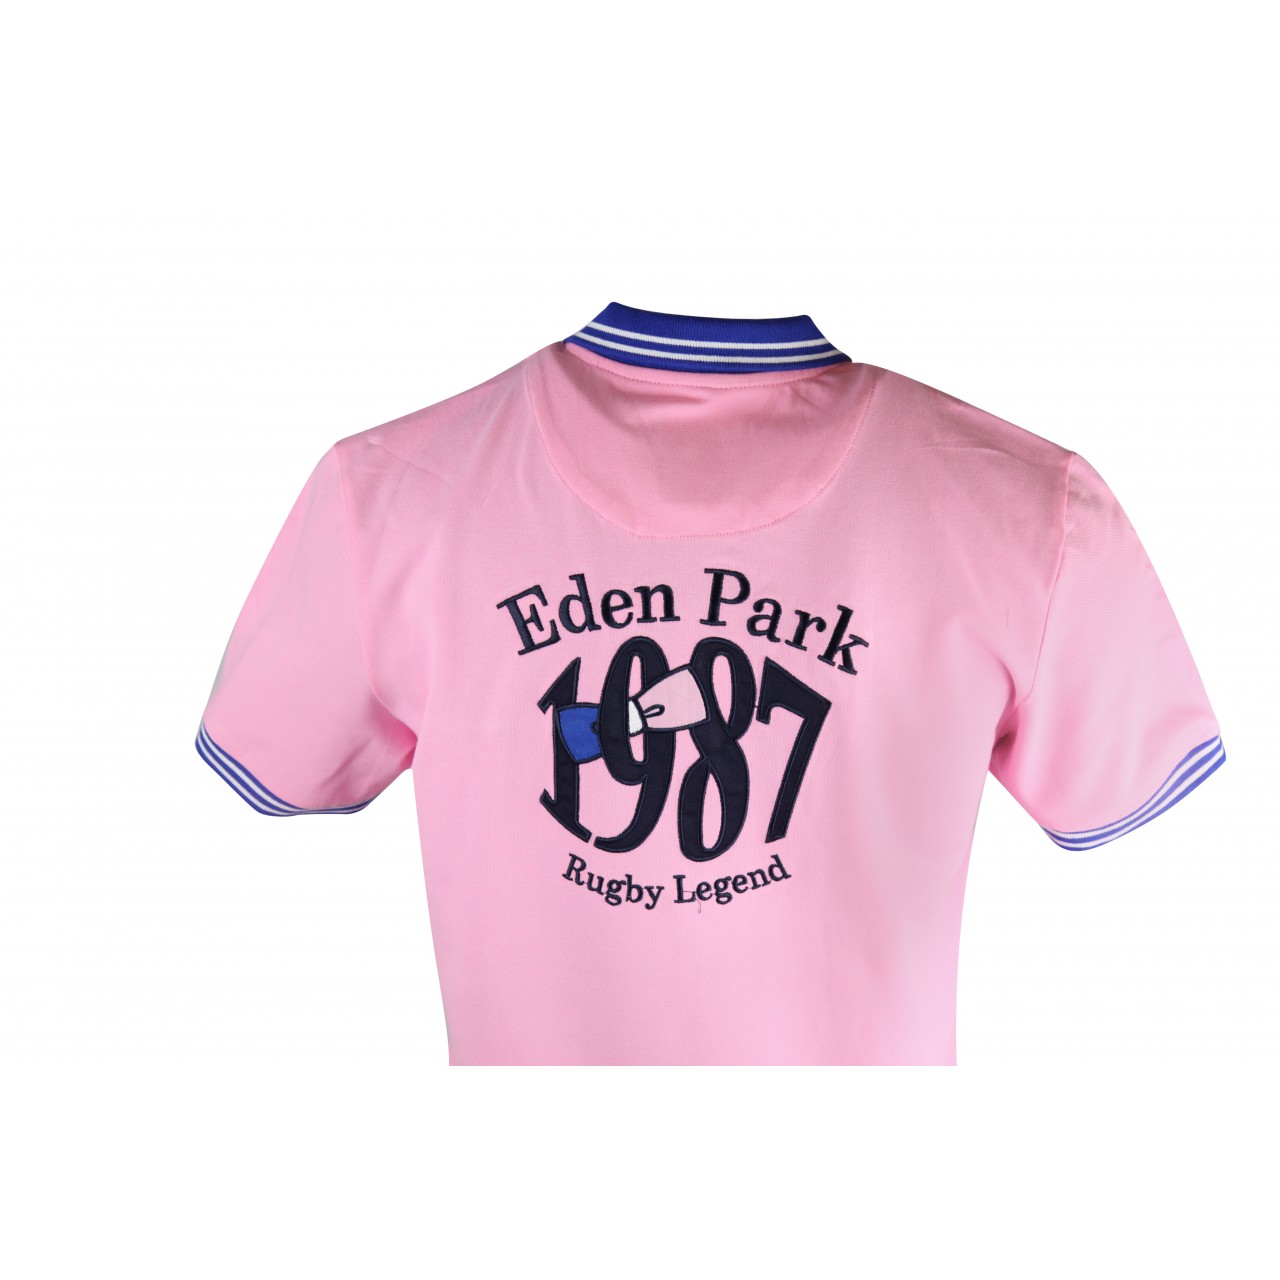 Easy Wear Collared 1987 Design Pink Polo Shirt Mens